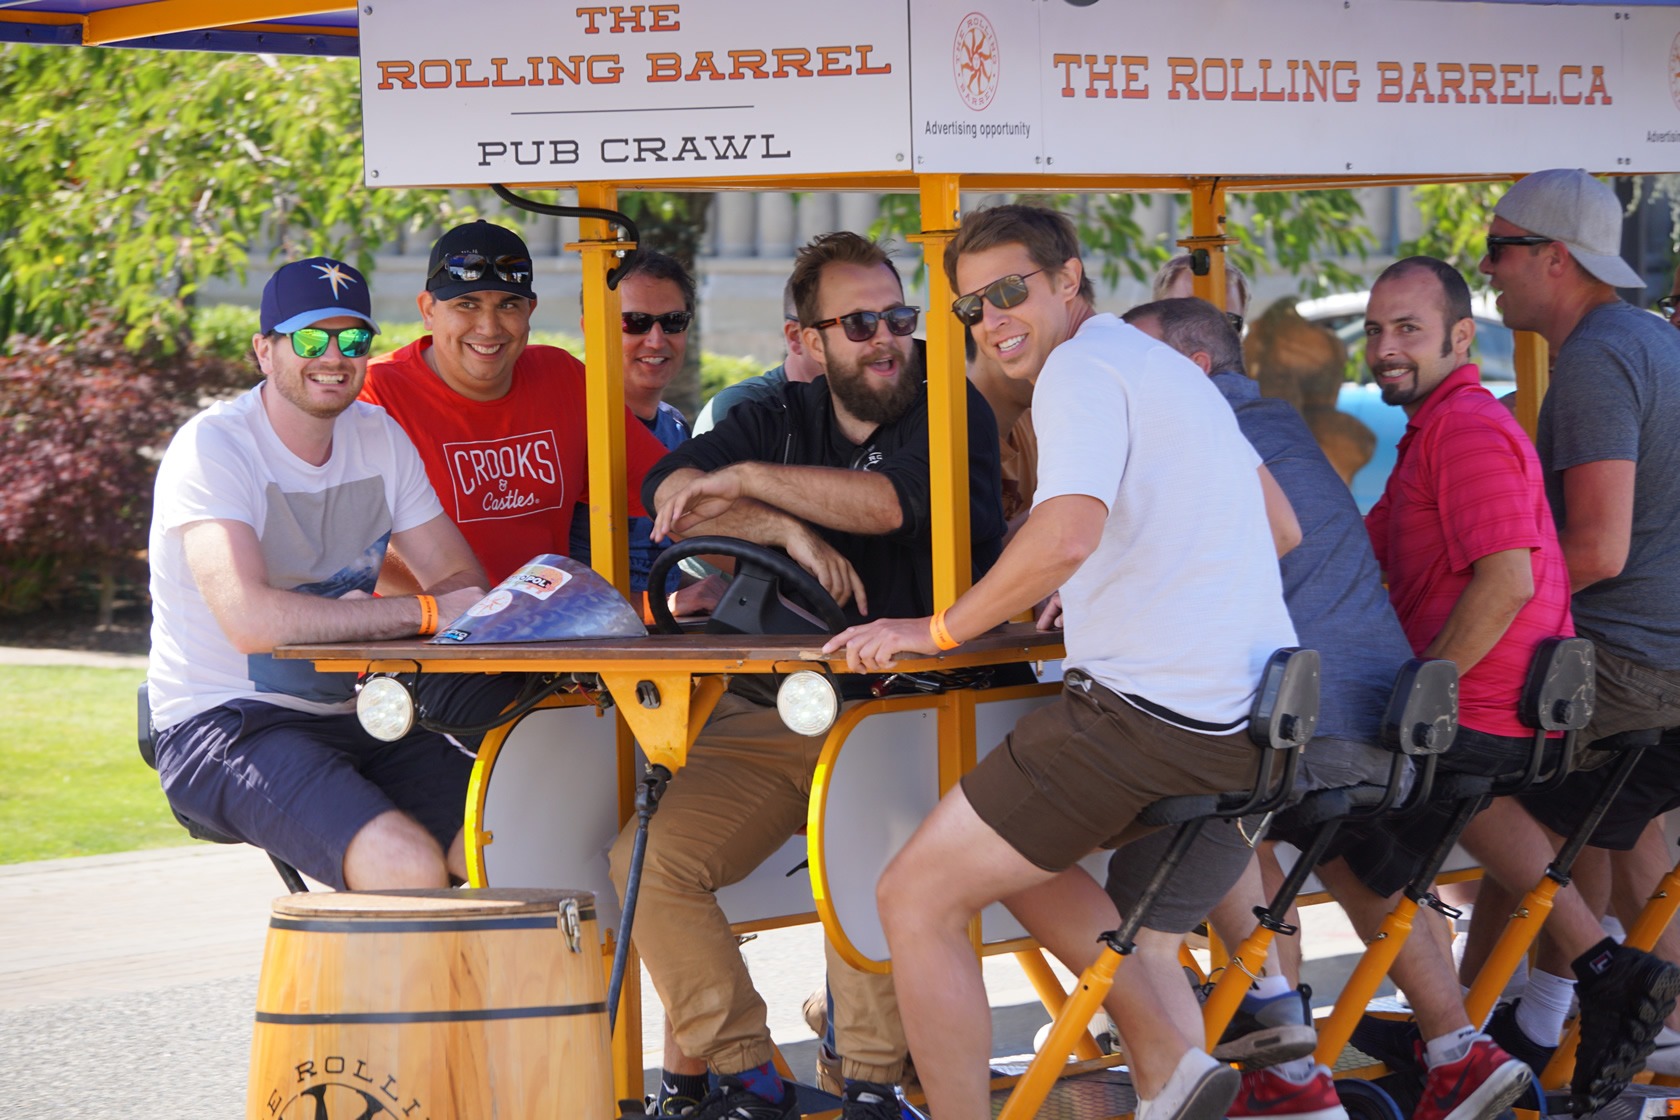 A group of happy men on tour and pedaling The Rolling Barrel vehicle with “Captain Mike” at the helm.